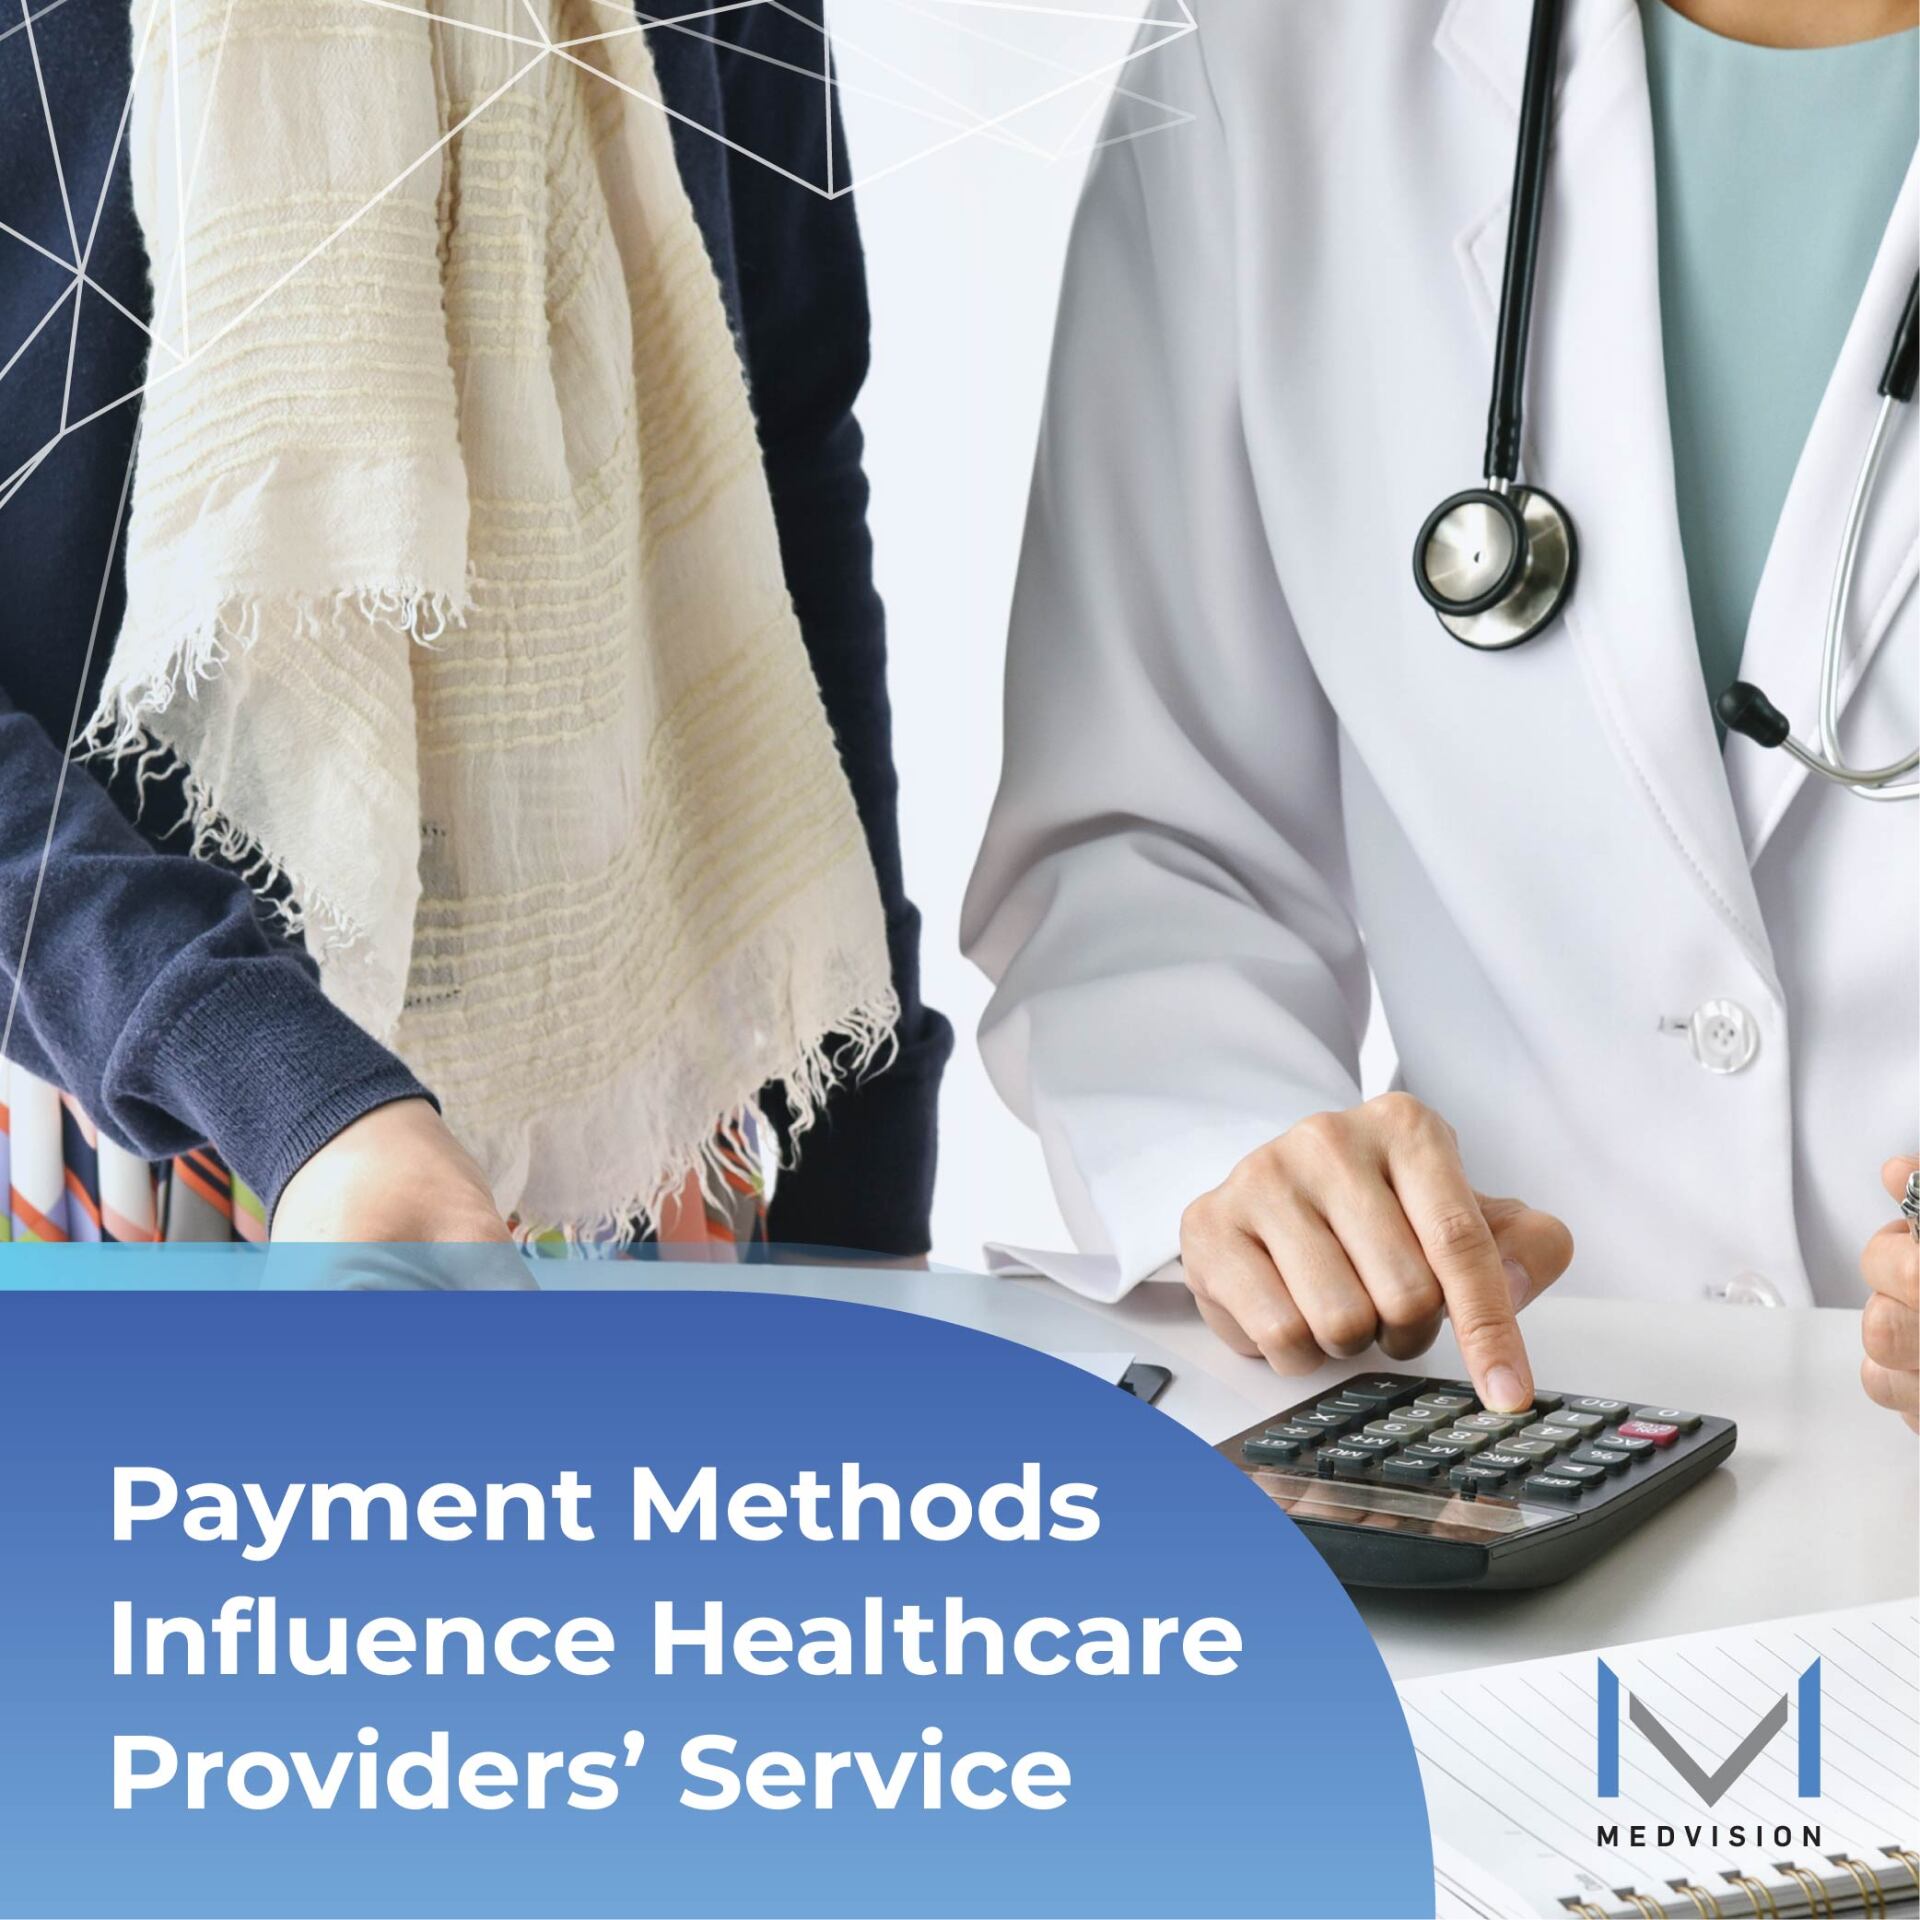 Payment Methods Influence Healthcare Providers’ Service